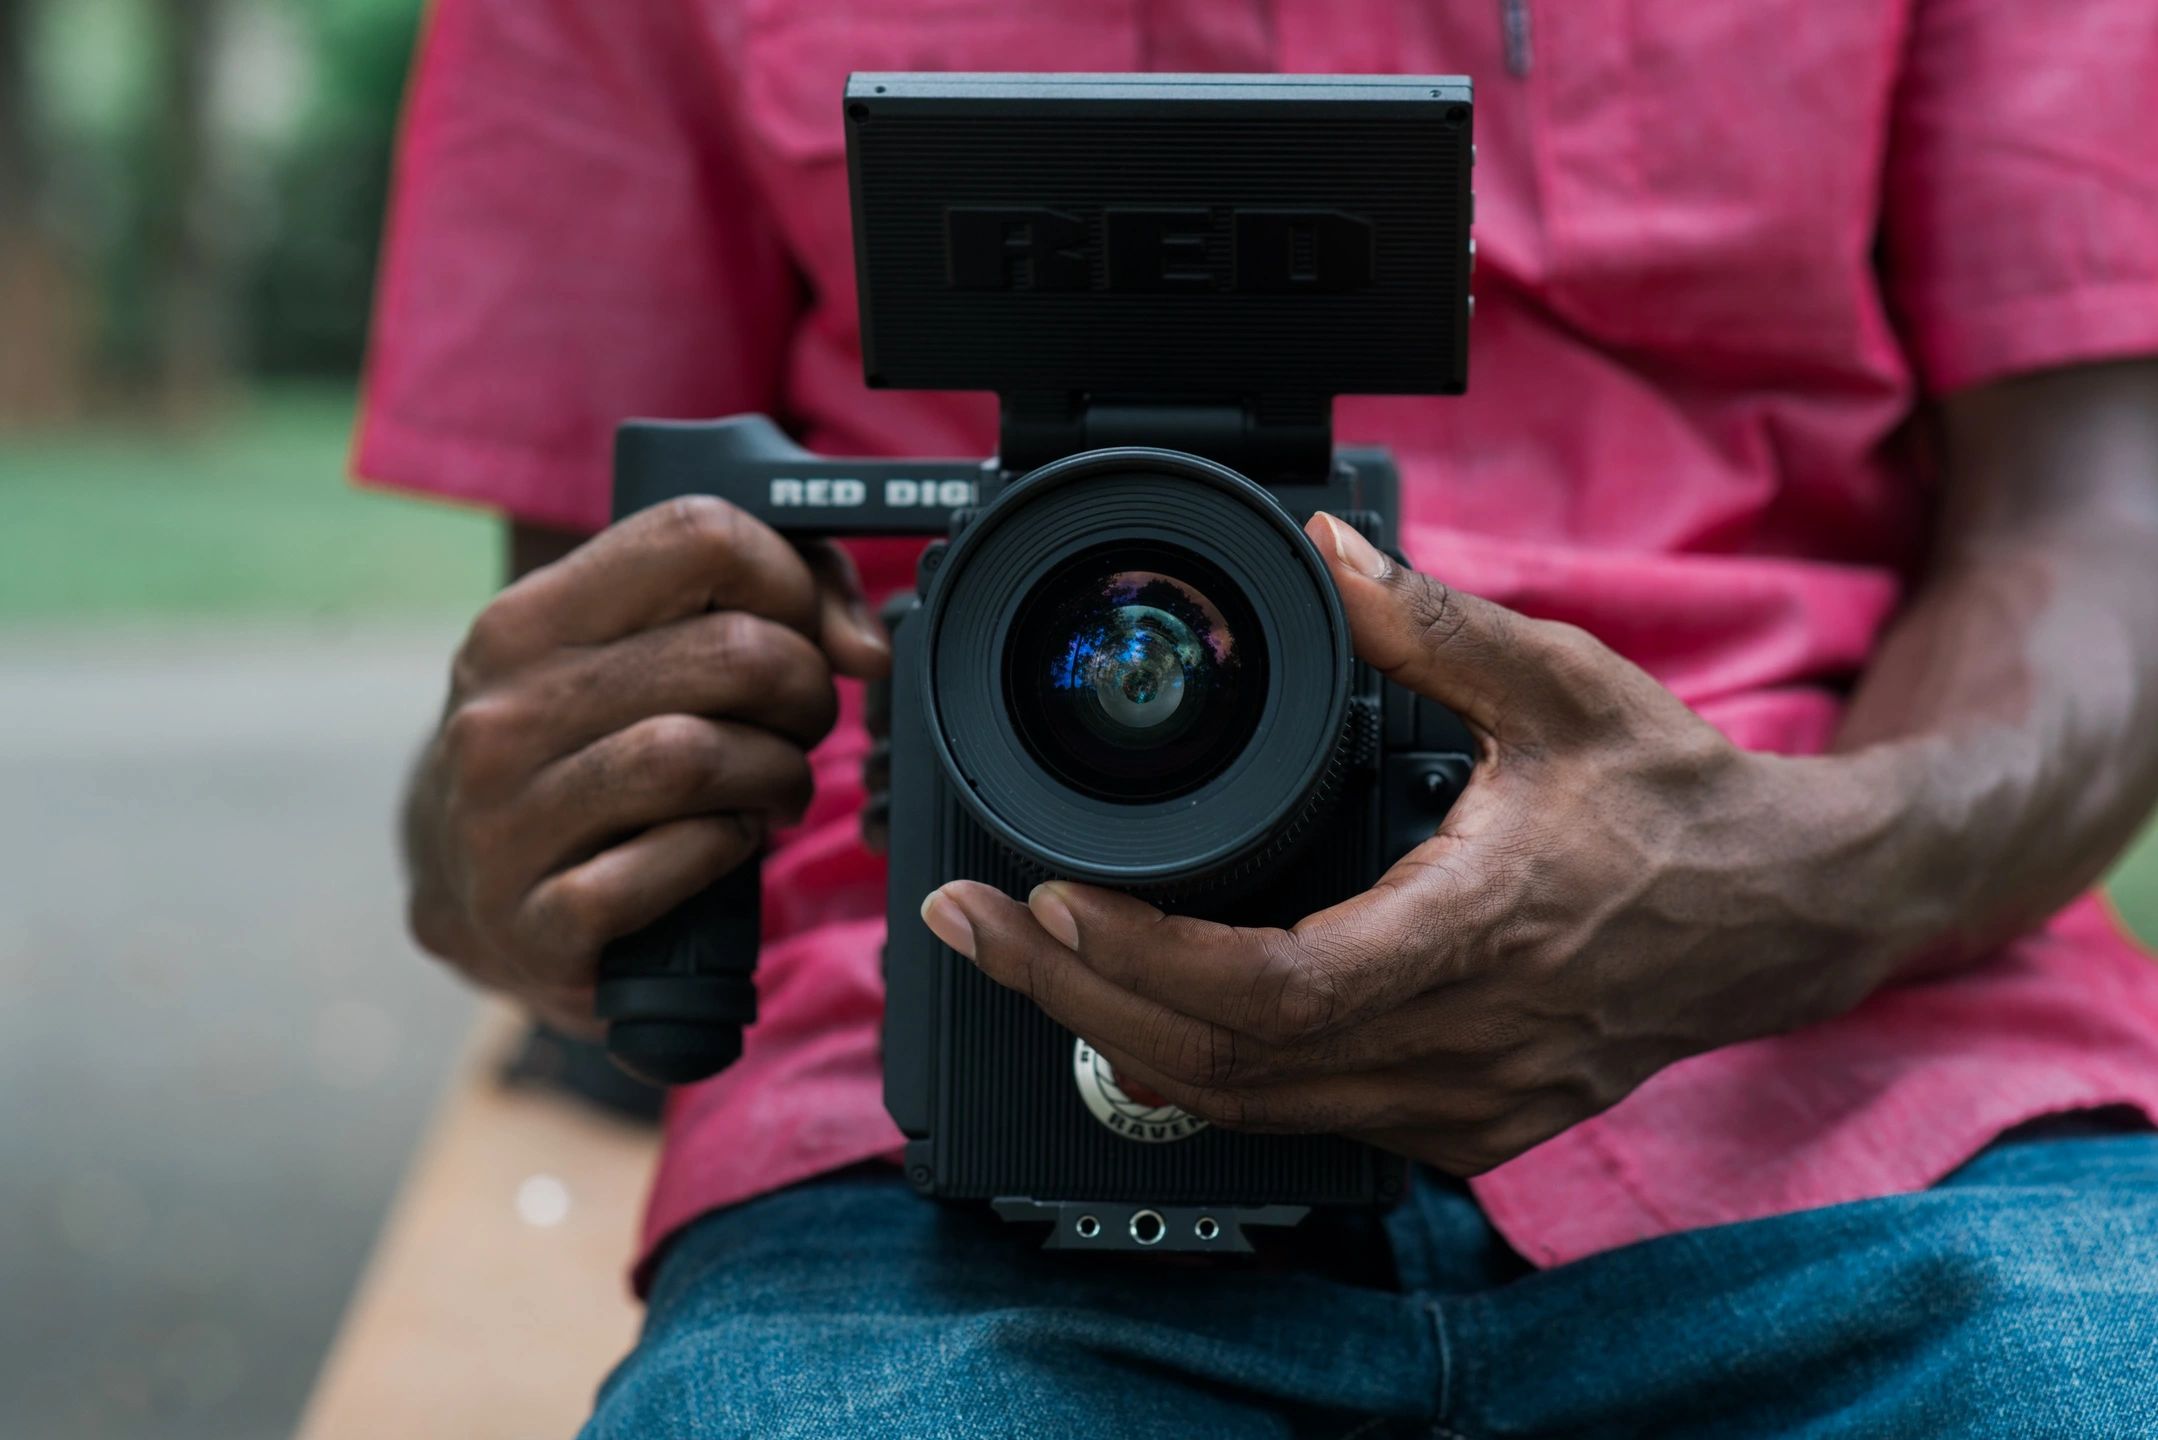 Close Up Image Of A Camera Being Held By What Appears To Be An African American Man Wearing A Red Shirt. Only The Camera Is Visible, You Do Not See The Person's Head Or Legs.